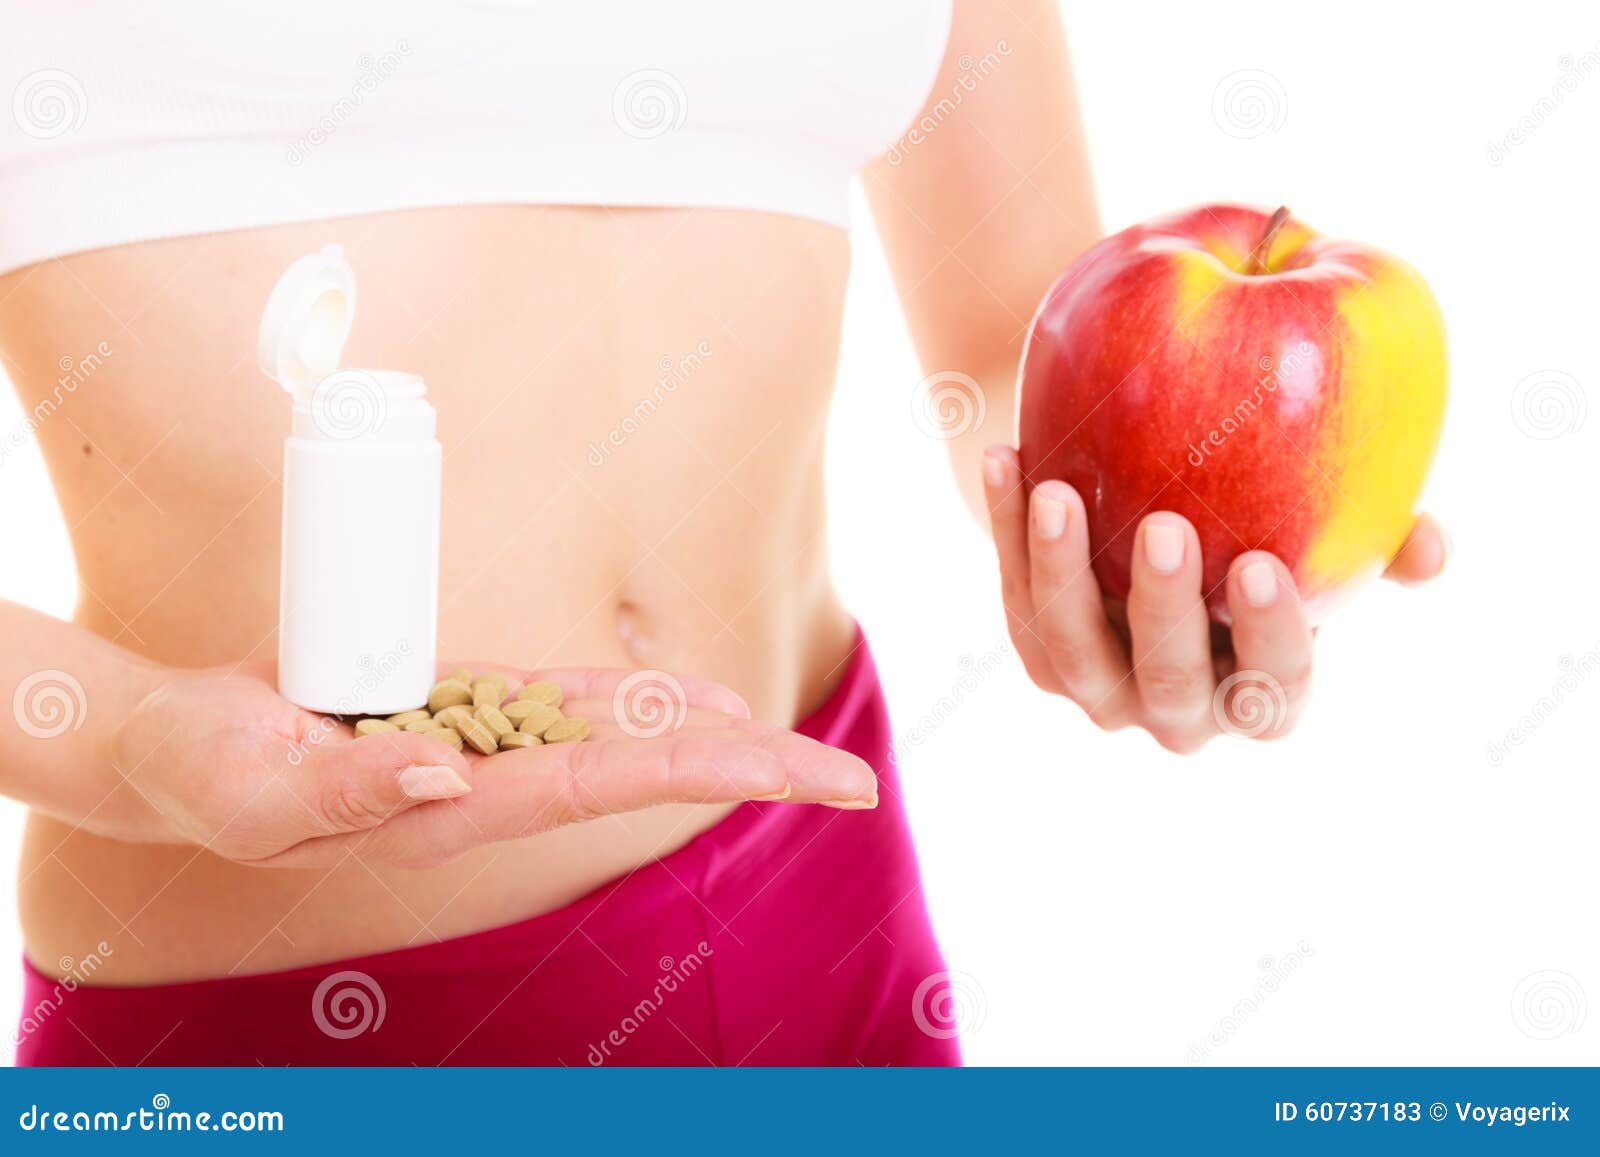 Woman Holding Vitamins And Apple. Health Care. Stock Photo - Image ...